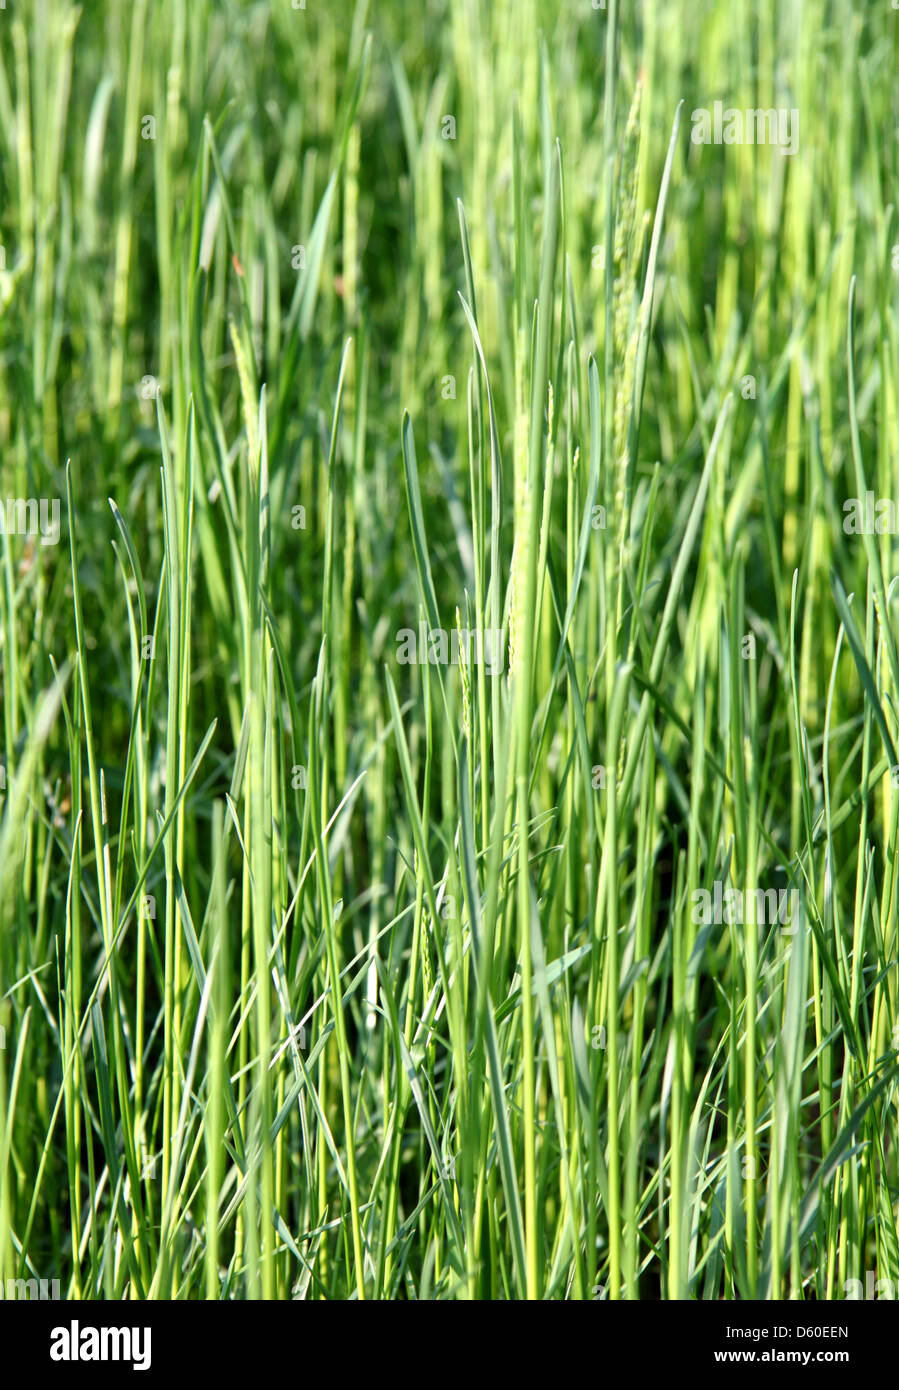 The texture of the green grass lawn Stock Photo